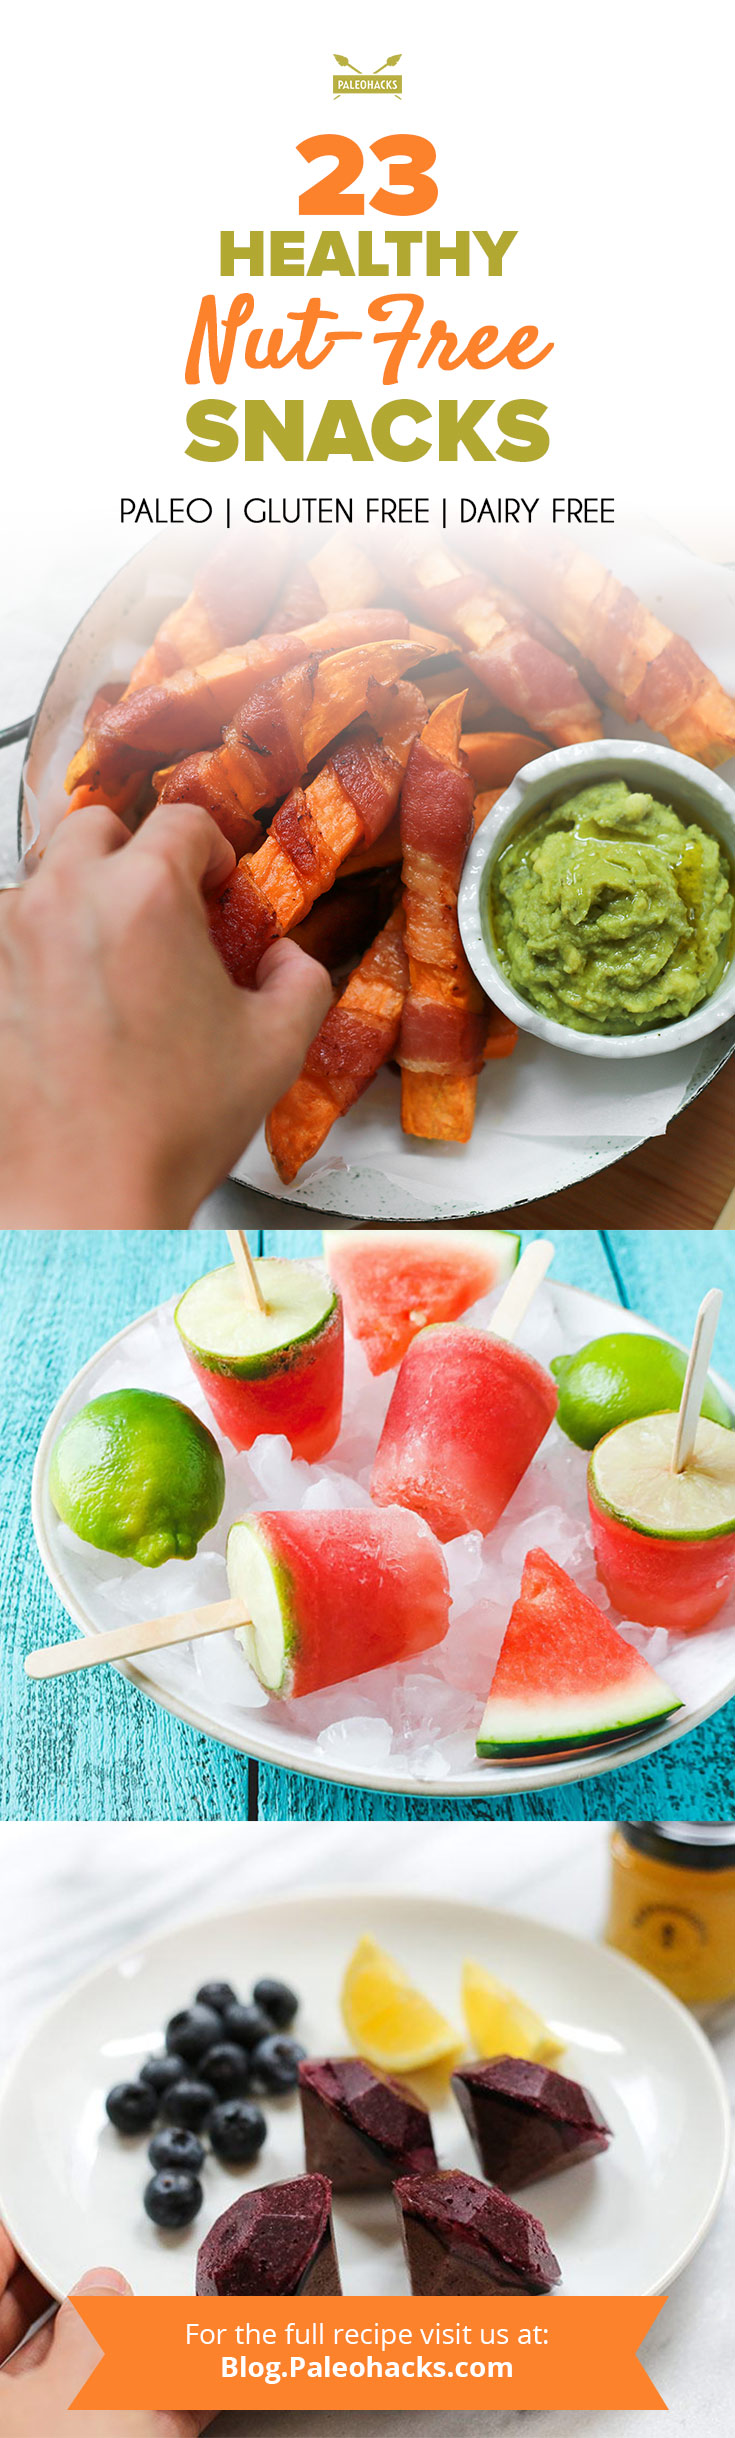 Forget stressing over food allergies, these 23 Paleo Nut-Free Snacks are perfect for midday munching. Your lunchbox snack-attack just got better!